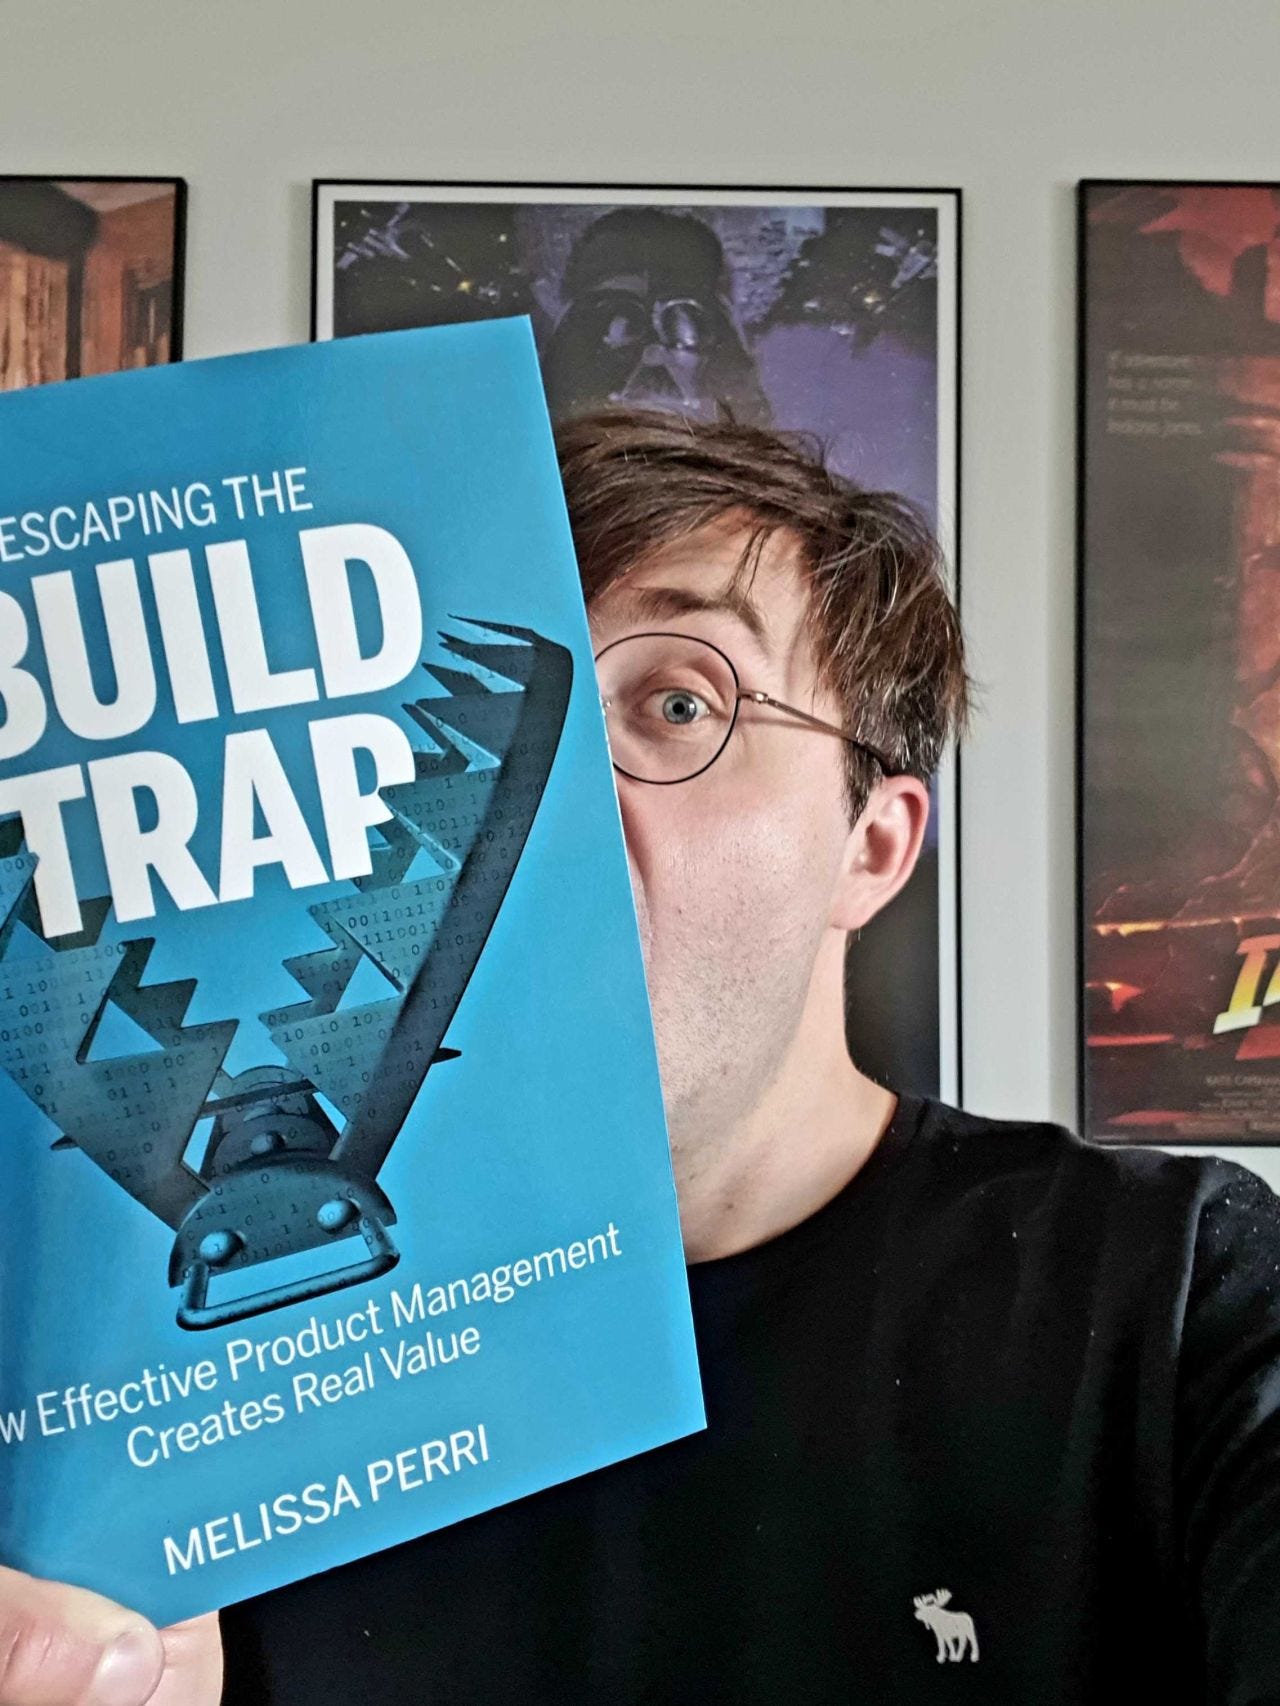 pm_library: “Escaping The Build Trap” | by Adam Kryszkiewicz | Medium